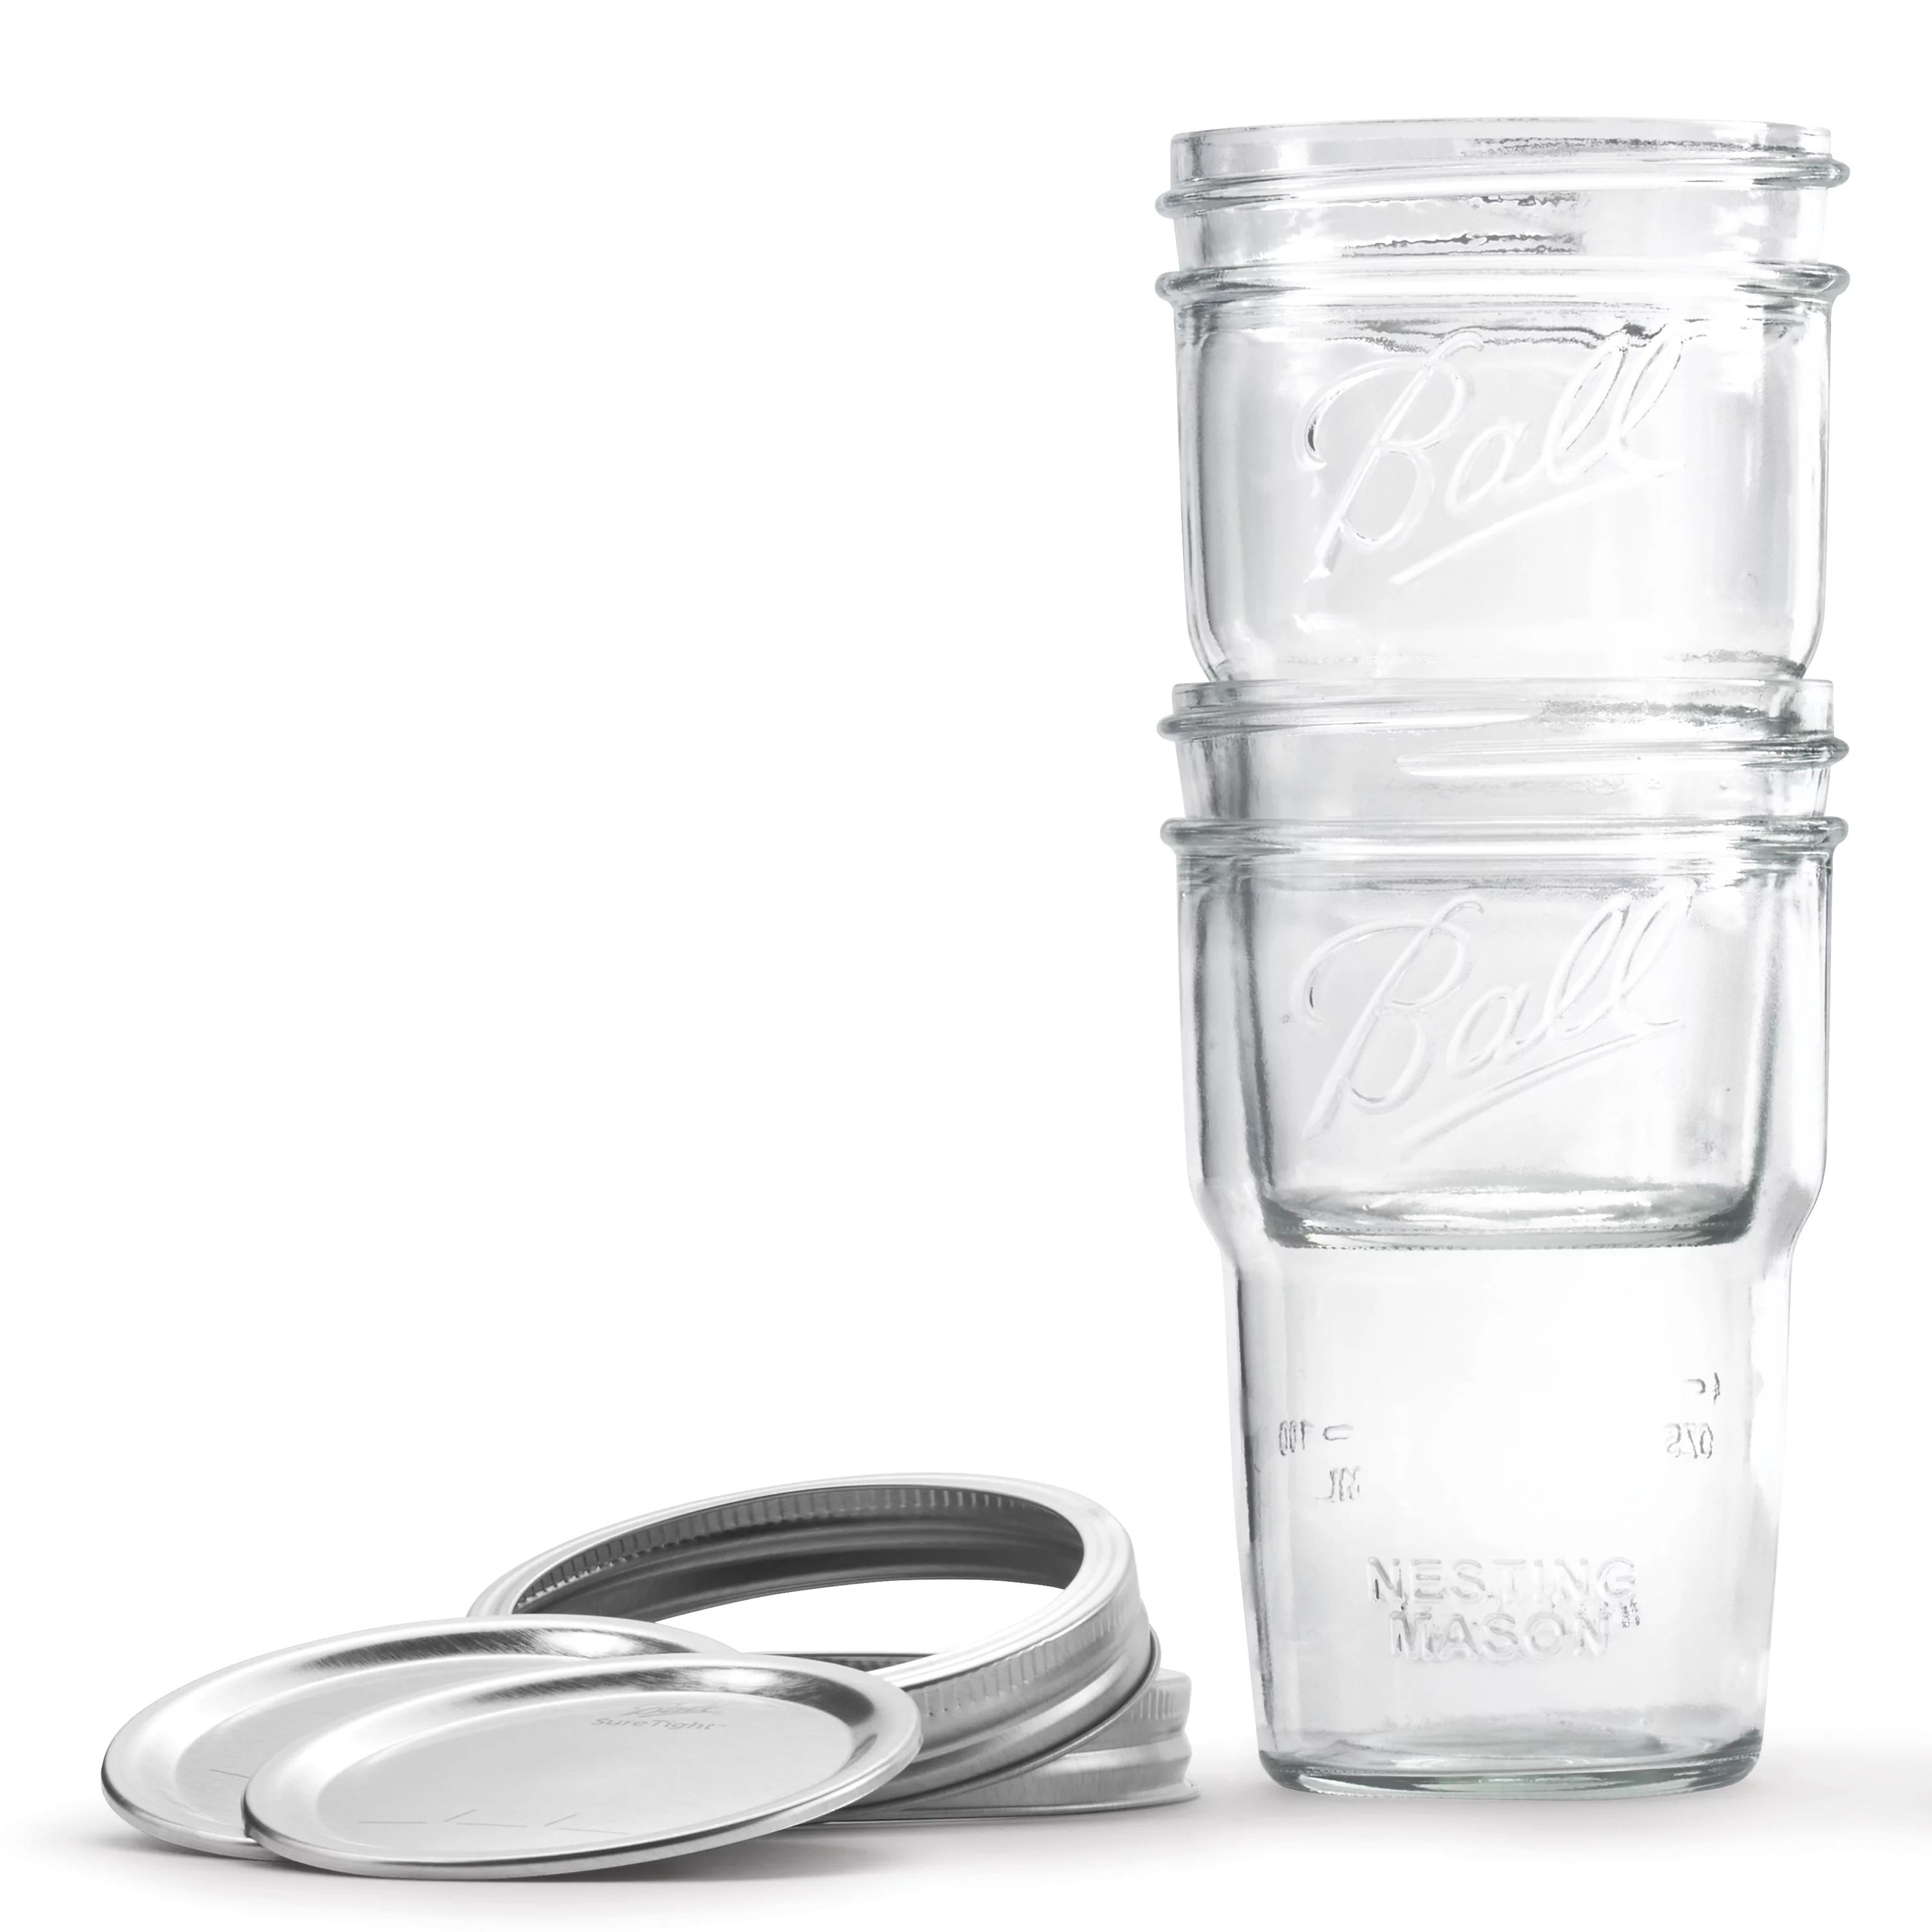 Ball Nesting Mason Jar Set with Lids & Bands for Canning or Drinkware, Wide Mouth, Pint, 4-Pack -... | Walmart (US)